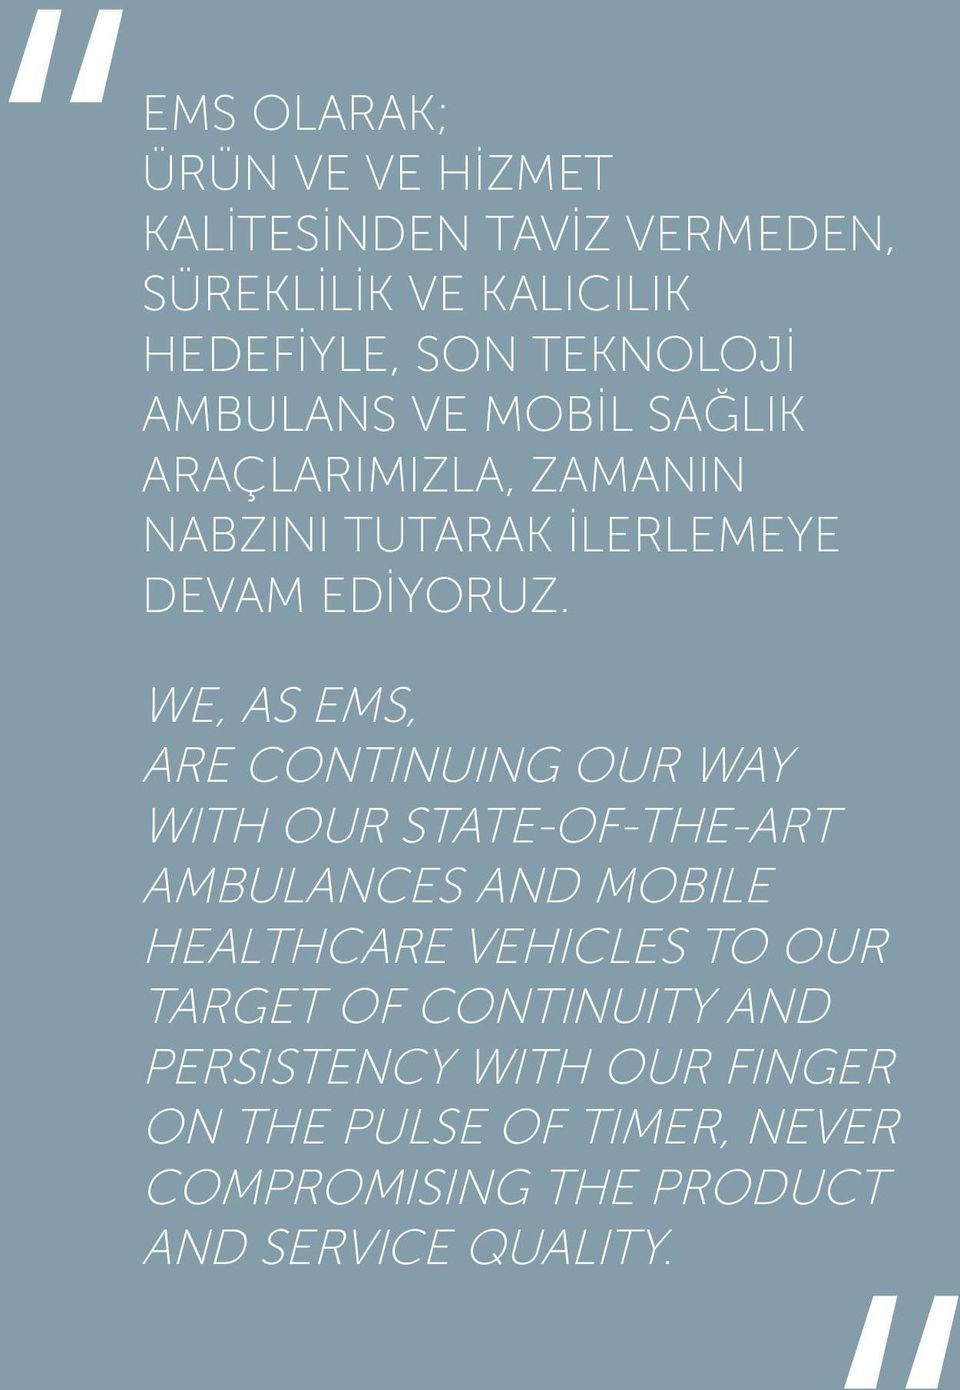 WE, AS EMS, ARE CONTINUING OUR WAY WITH OUR STATE-OF-THE-ART AMBULANCES AND MOBILE HEALTHCARE VEHICLES TO OUR